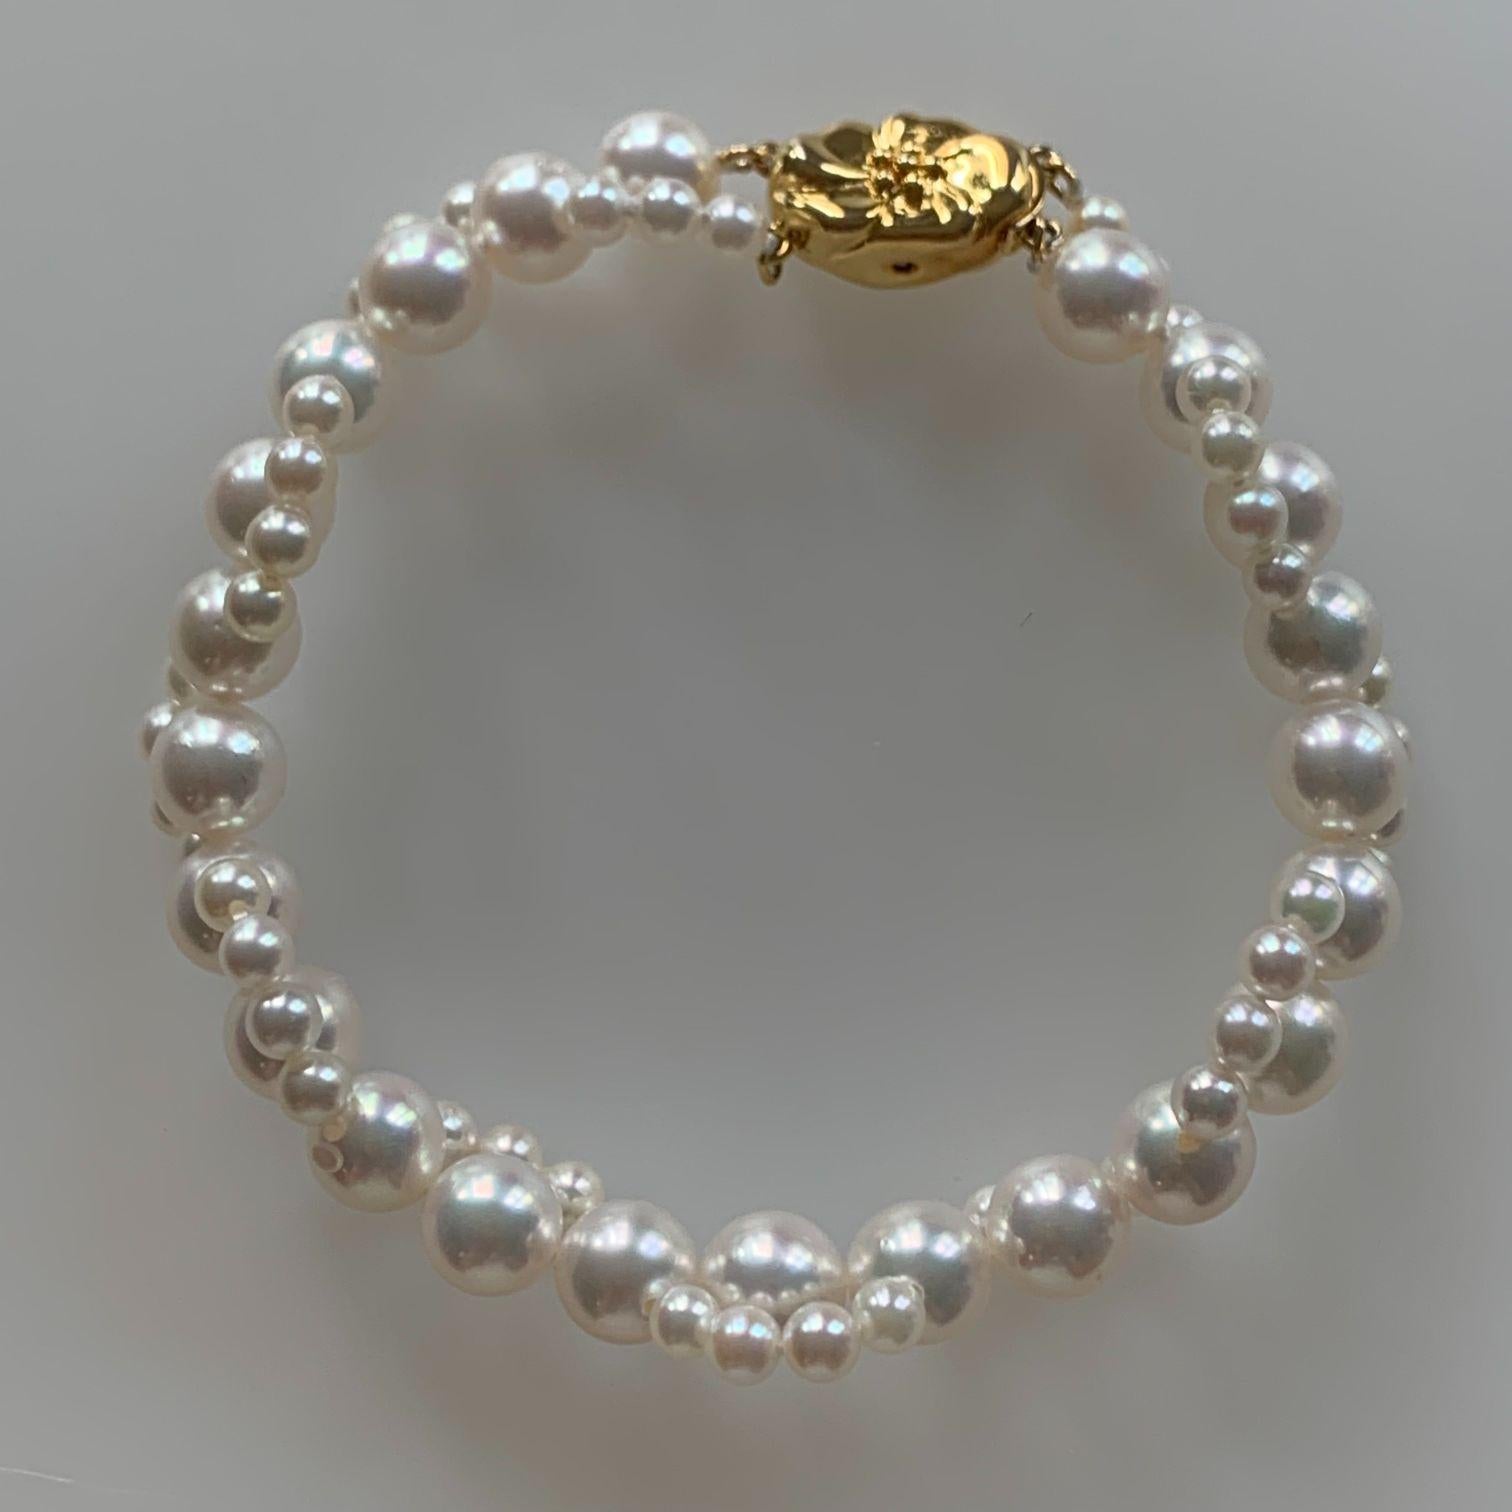 This Standalone Woven Pearl Strand Design is stunning, while the unique Gold Clasp further brings out the elegance of the bracelet in a synergistic way. A perfect match for those special occasions.

Akoya Pearls from Ise Shima Japan are 100%